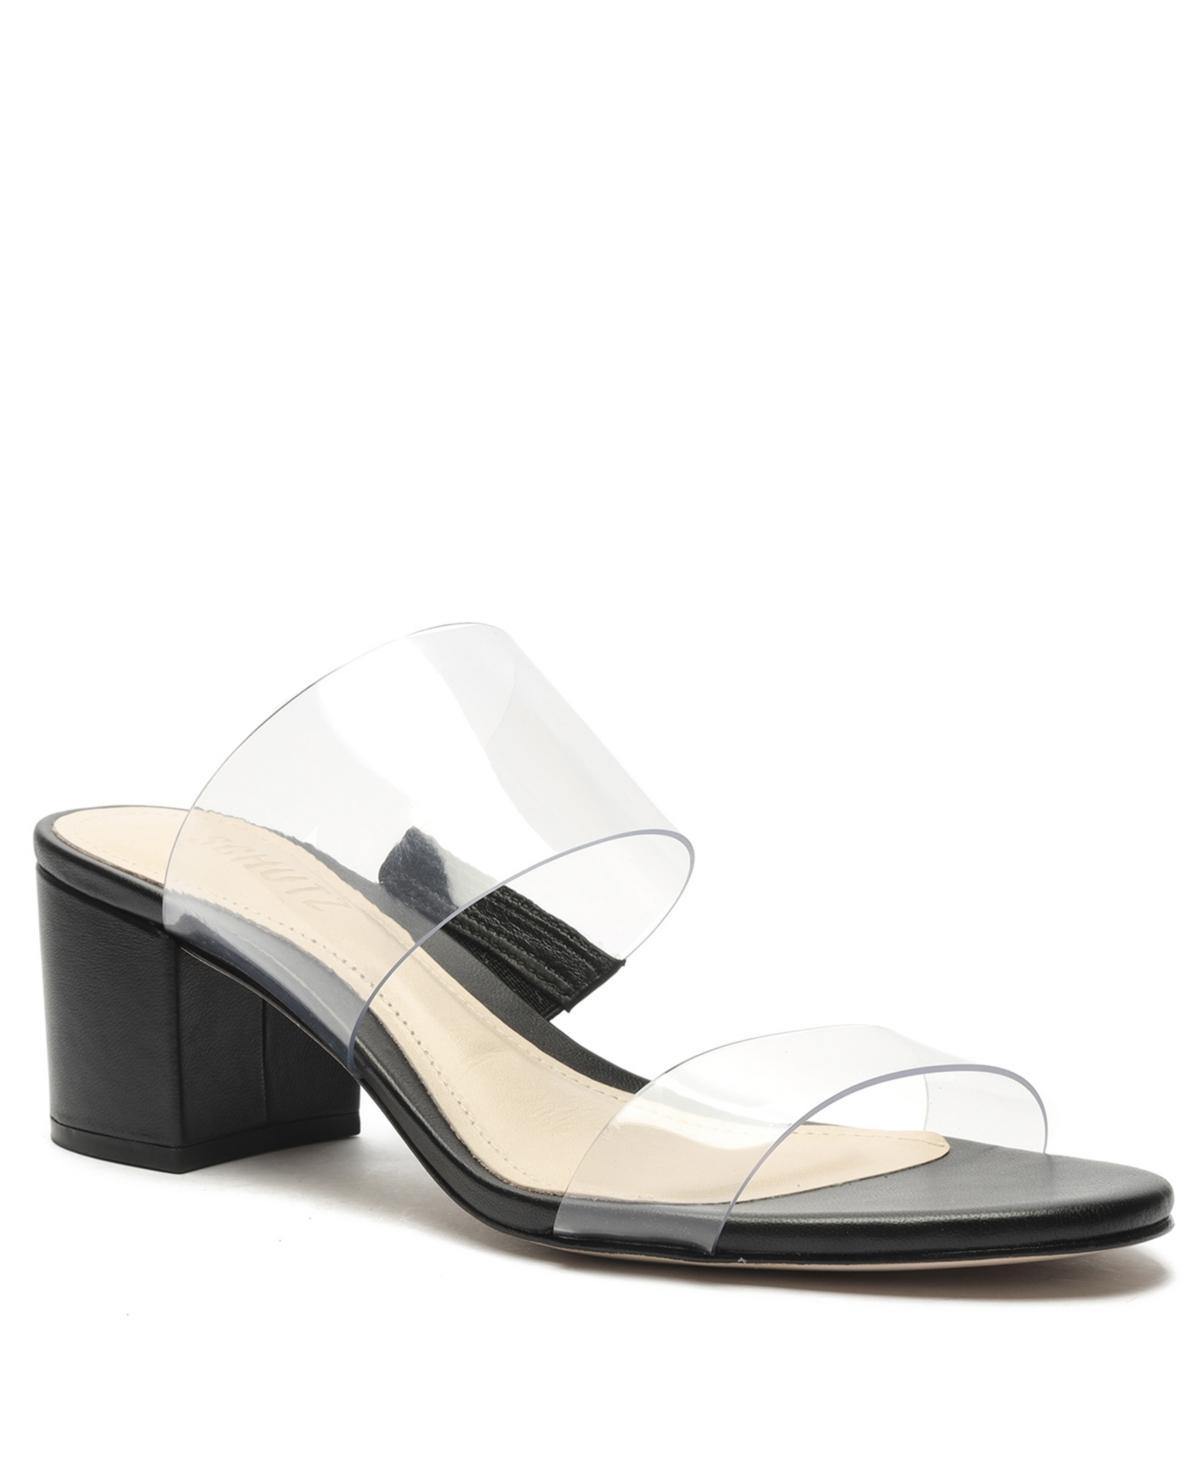 Victorie Sandal Product Image